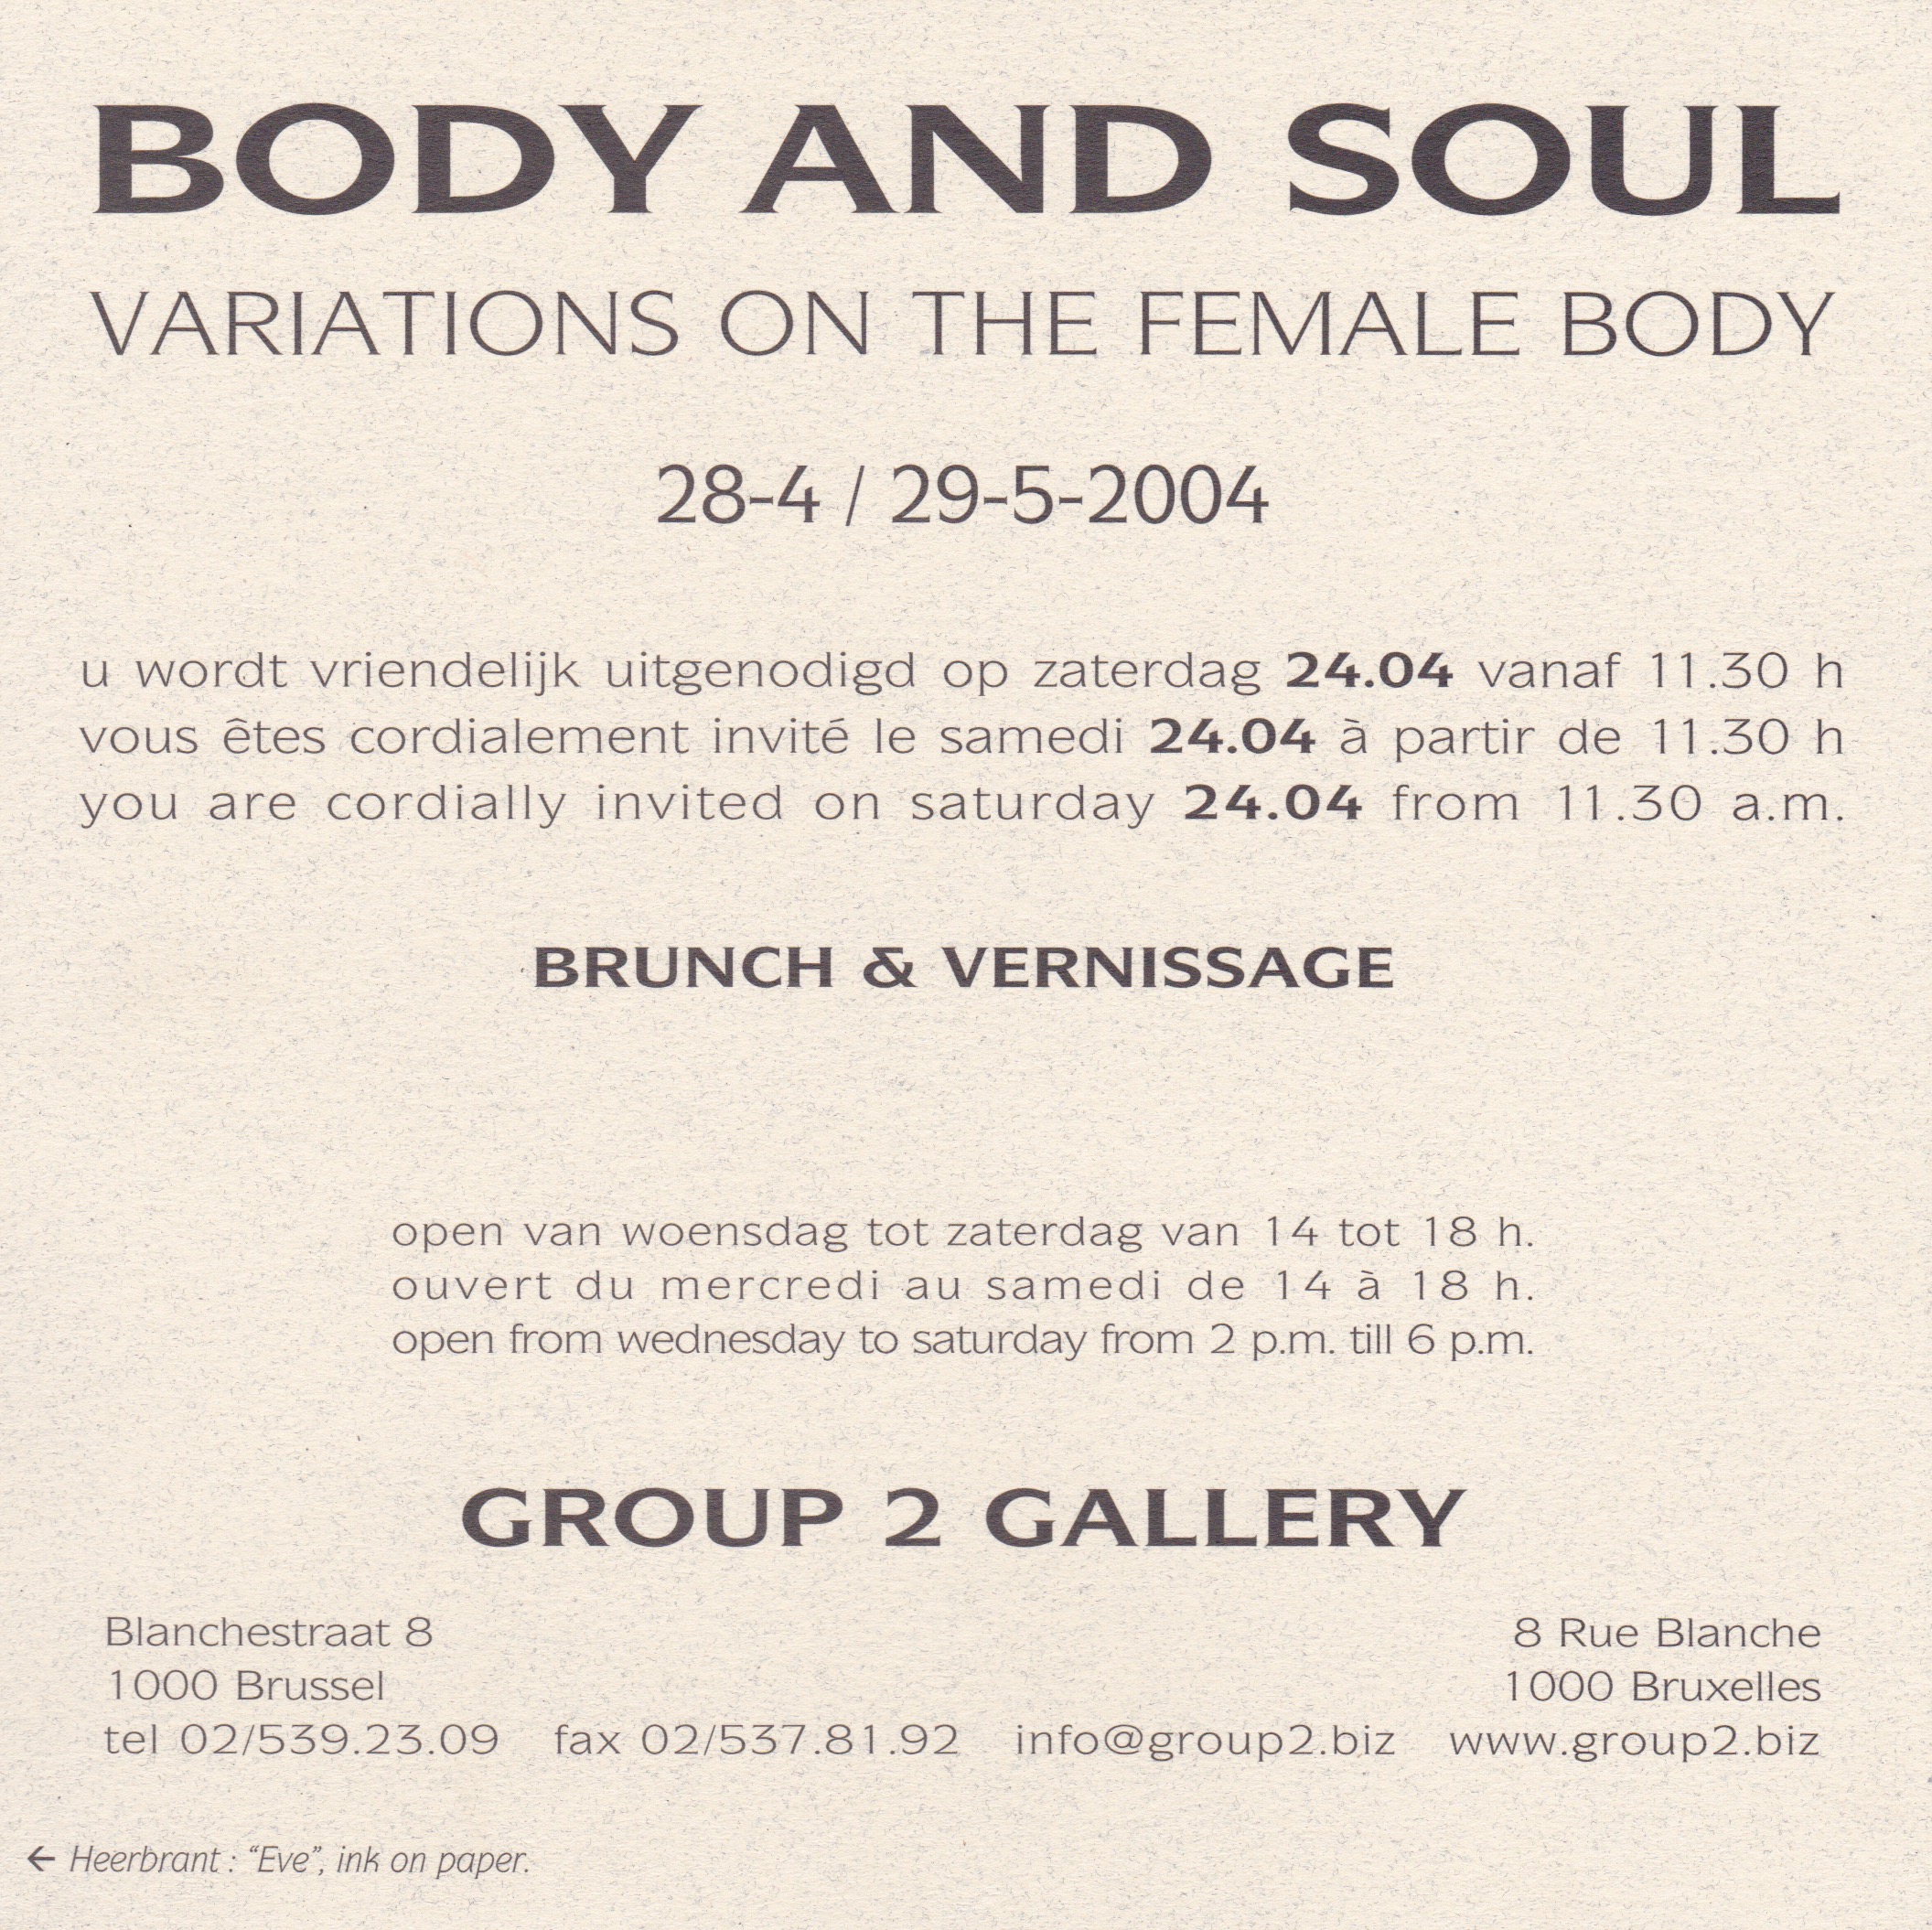 Body and soul, Group 2 gallery, 2004